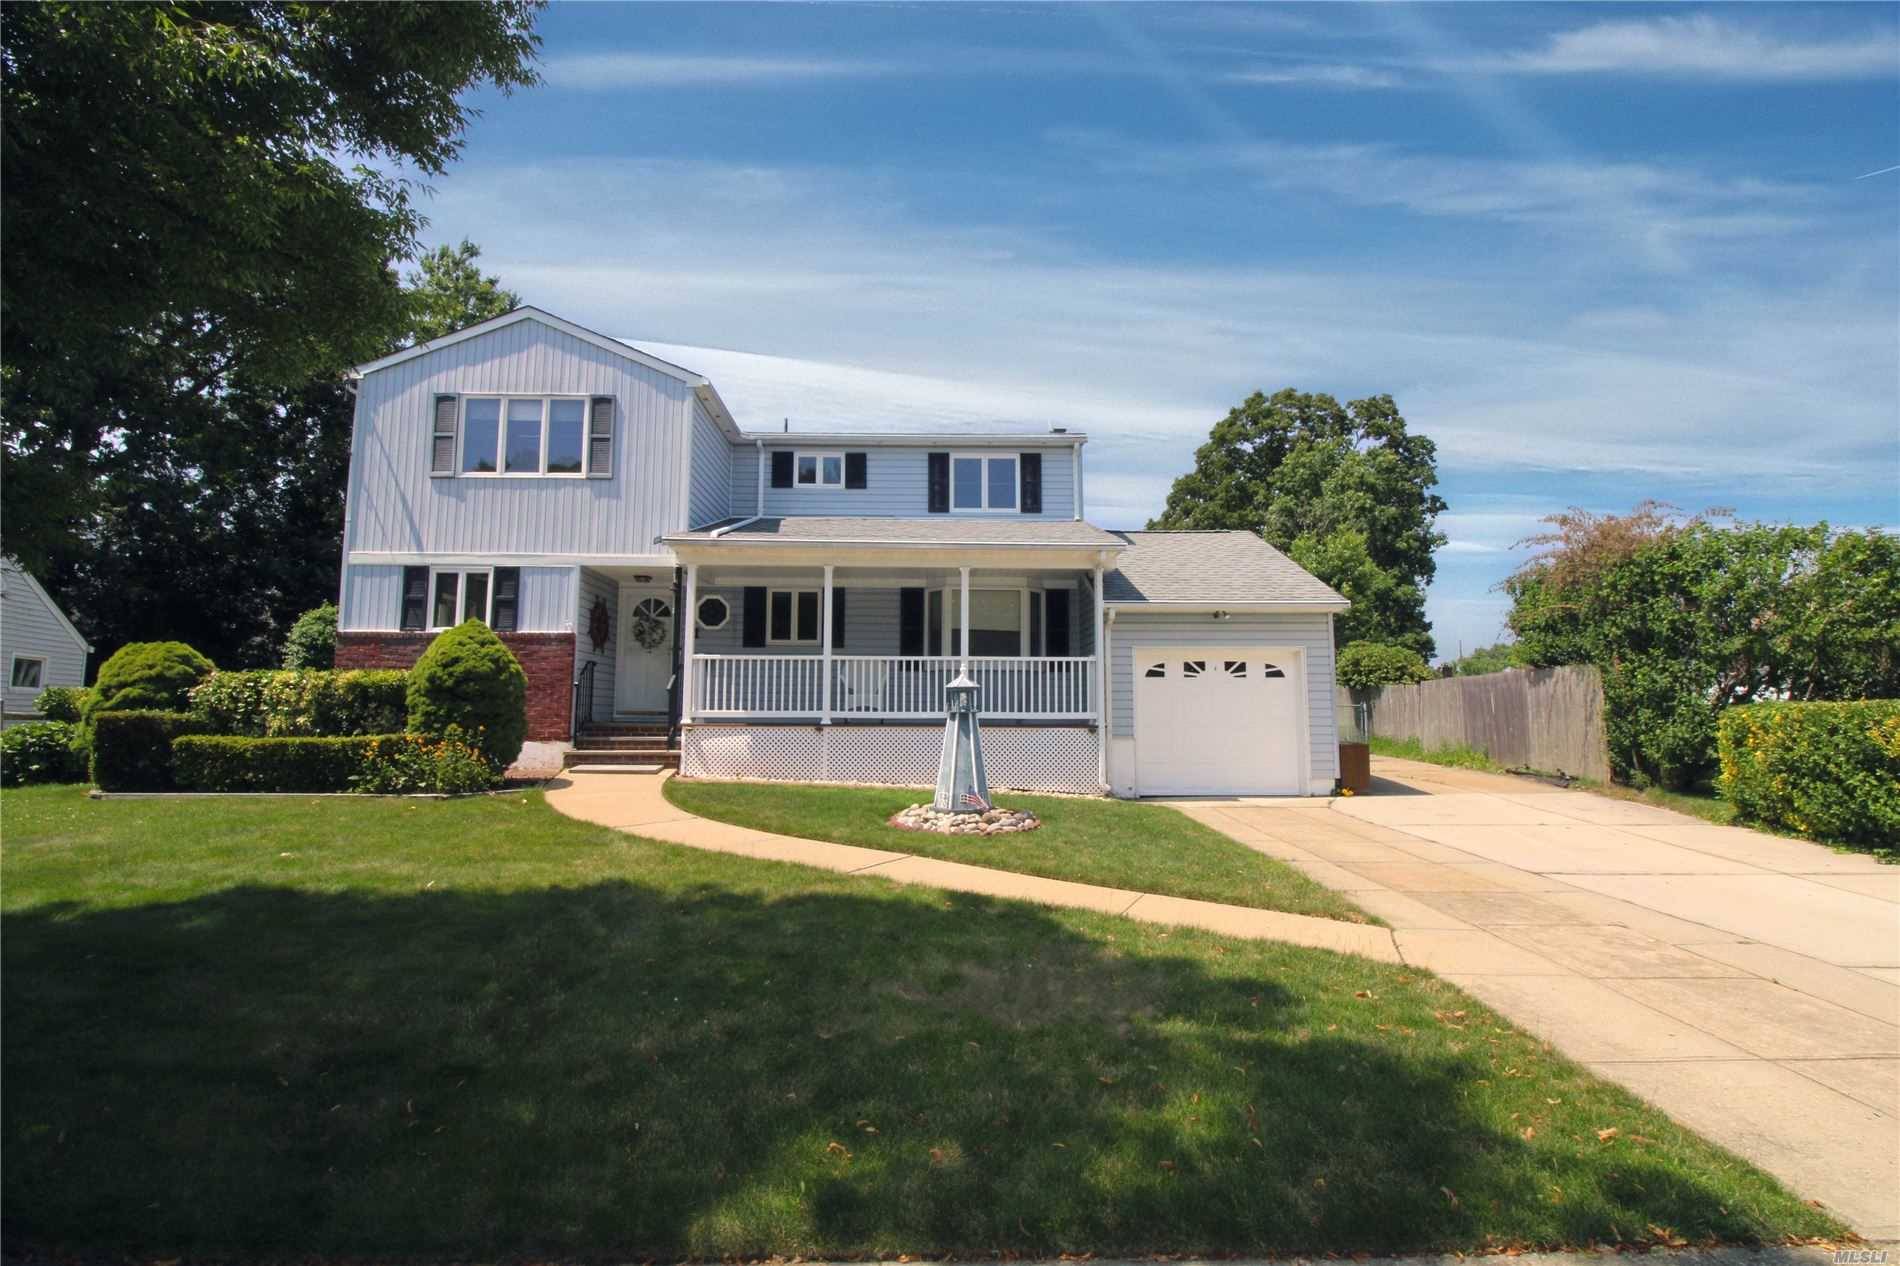 In the heart of Massapequa, nestled in a cozy neighborhood, this potential Mother Daughter sits on a large piece of property w expansive backyard.